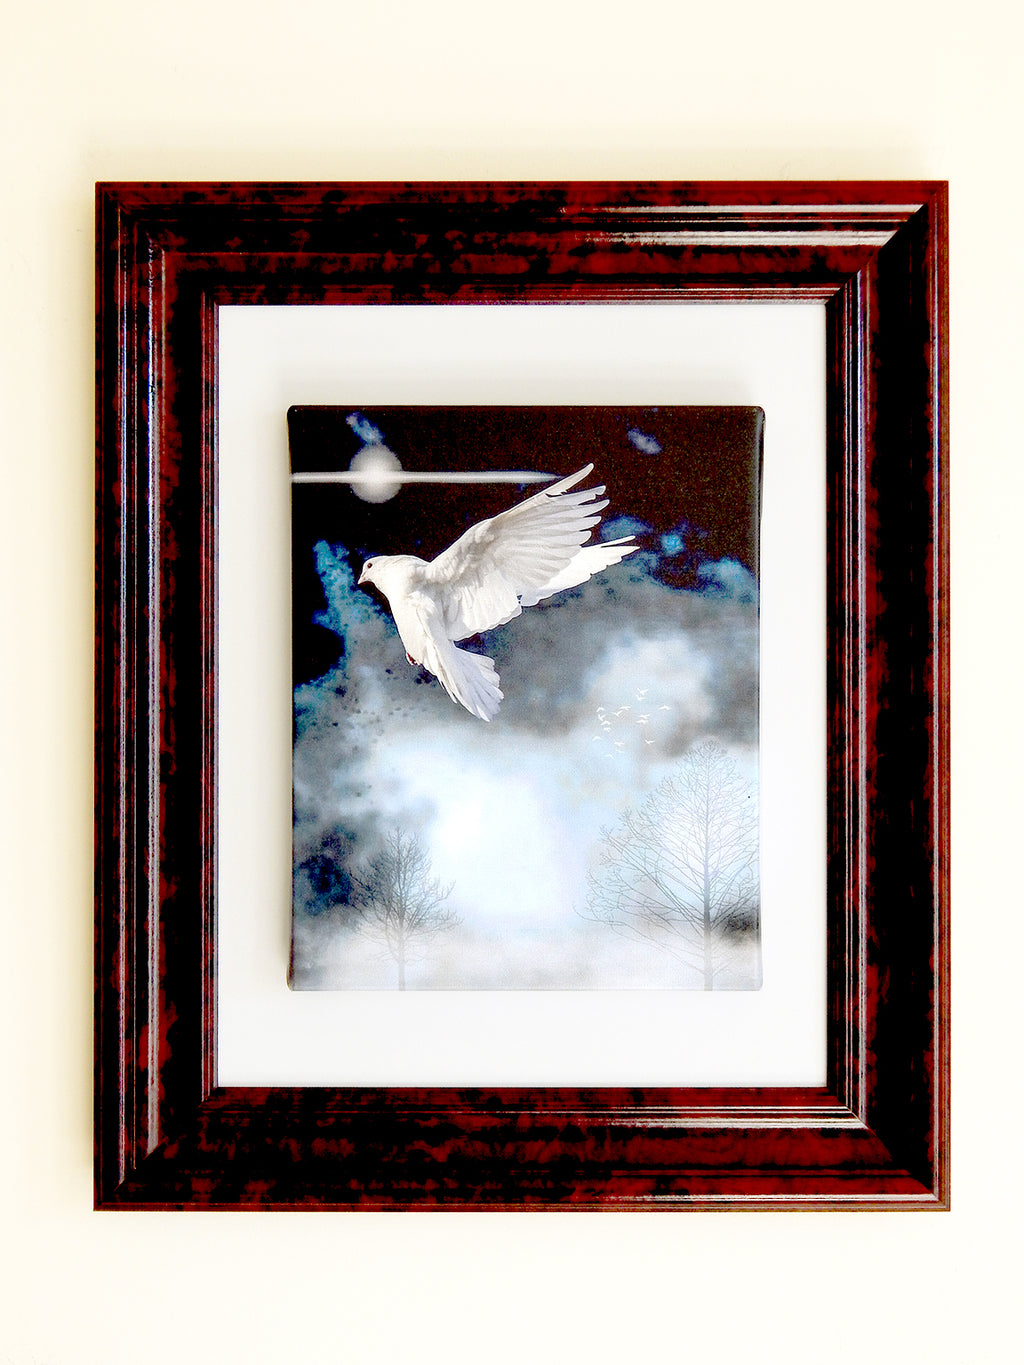 My Peace-2  -(Canvas Print in unglass frame) Free Shipping